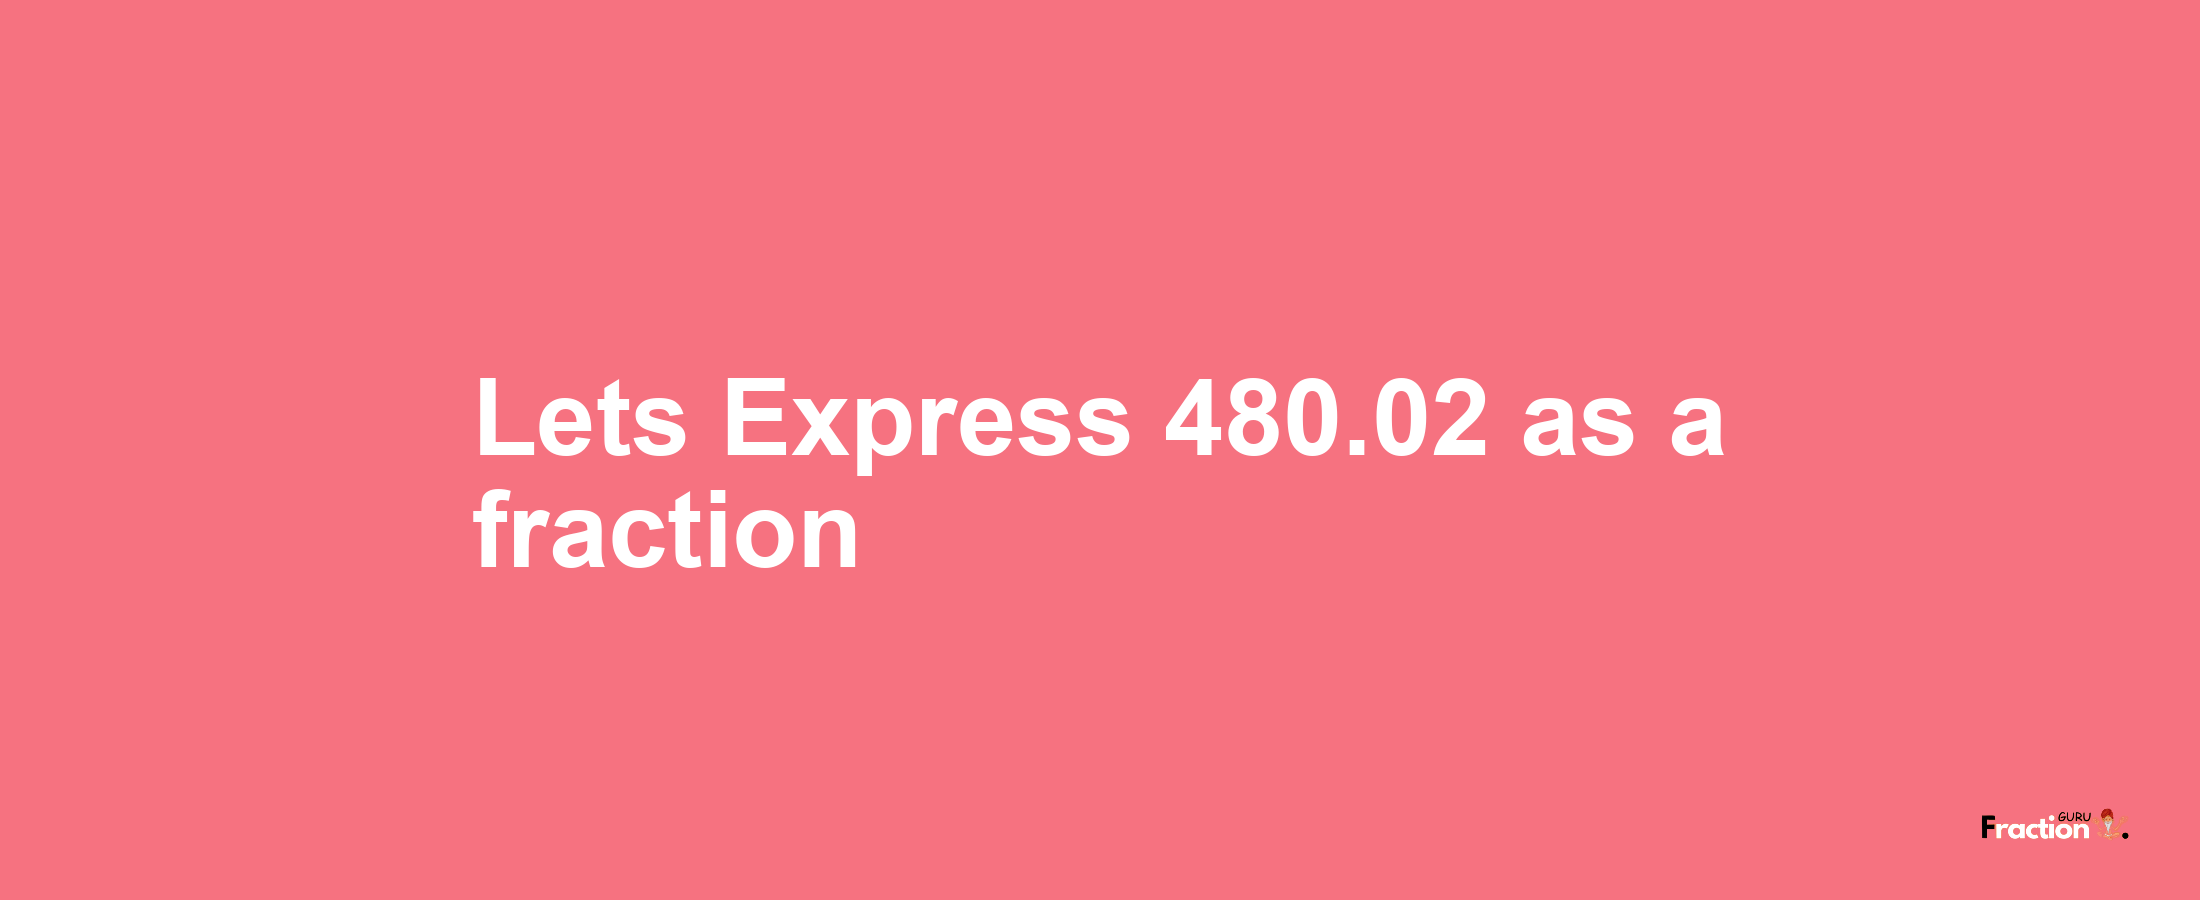 Lets Express 480.02 as afraction